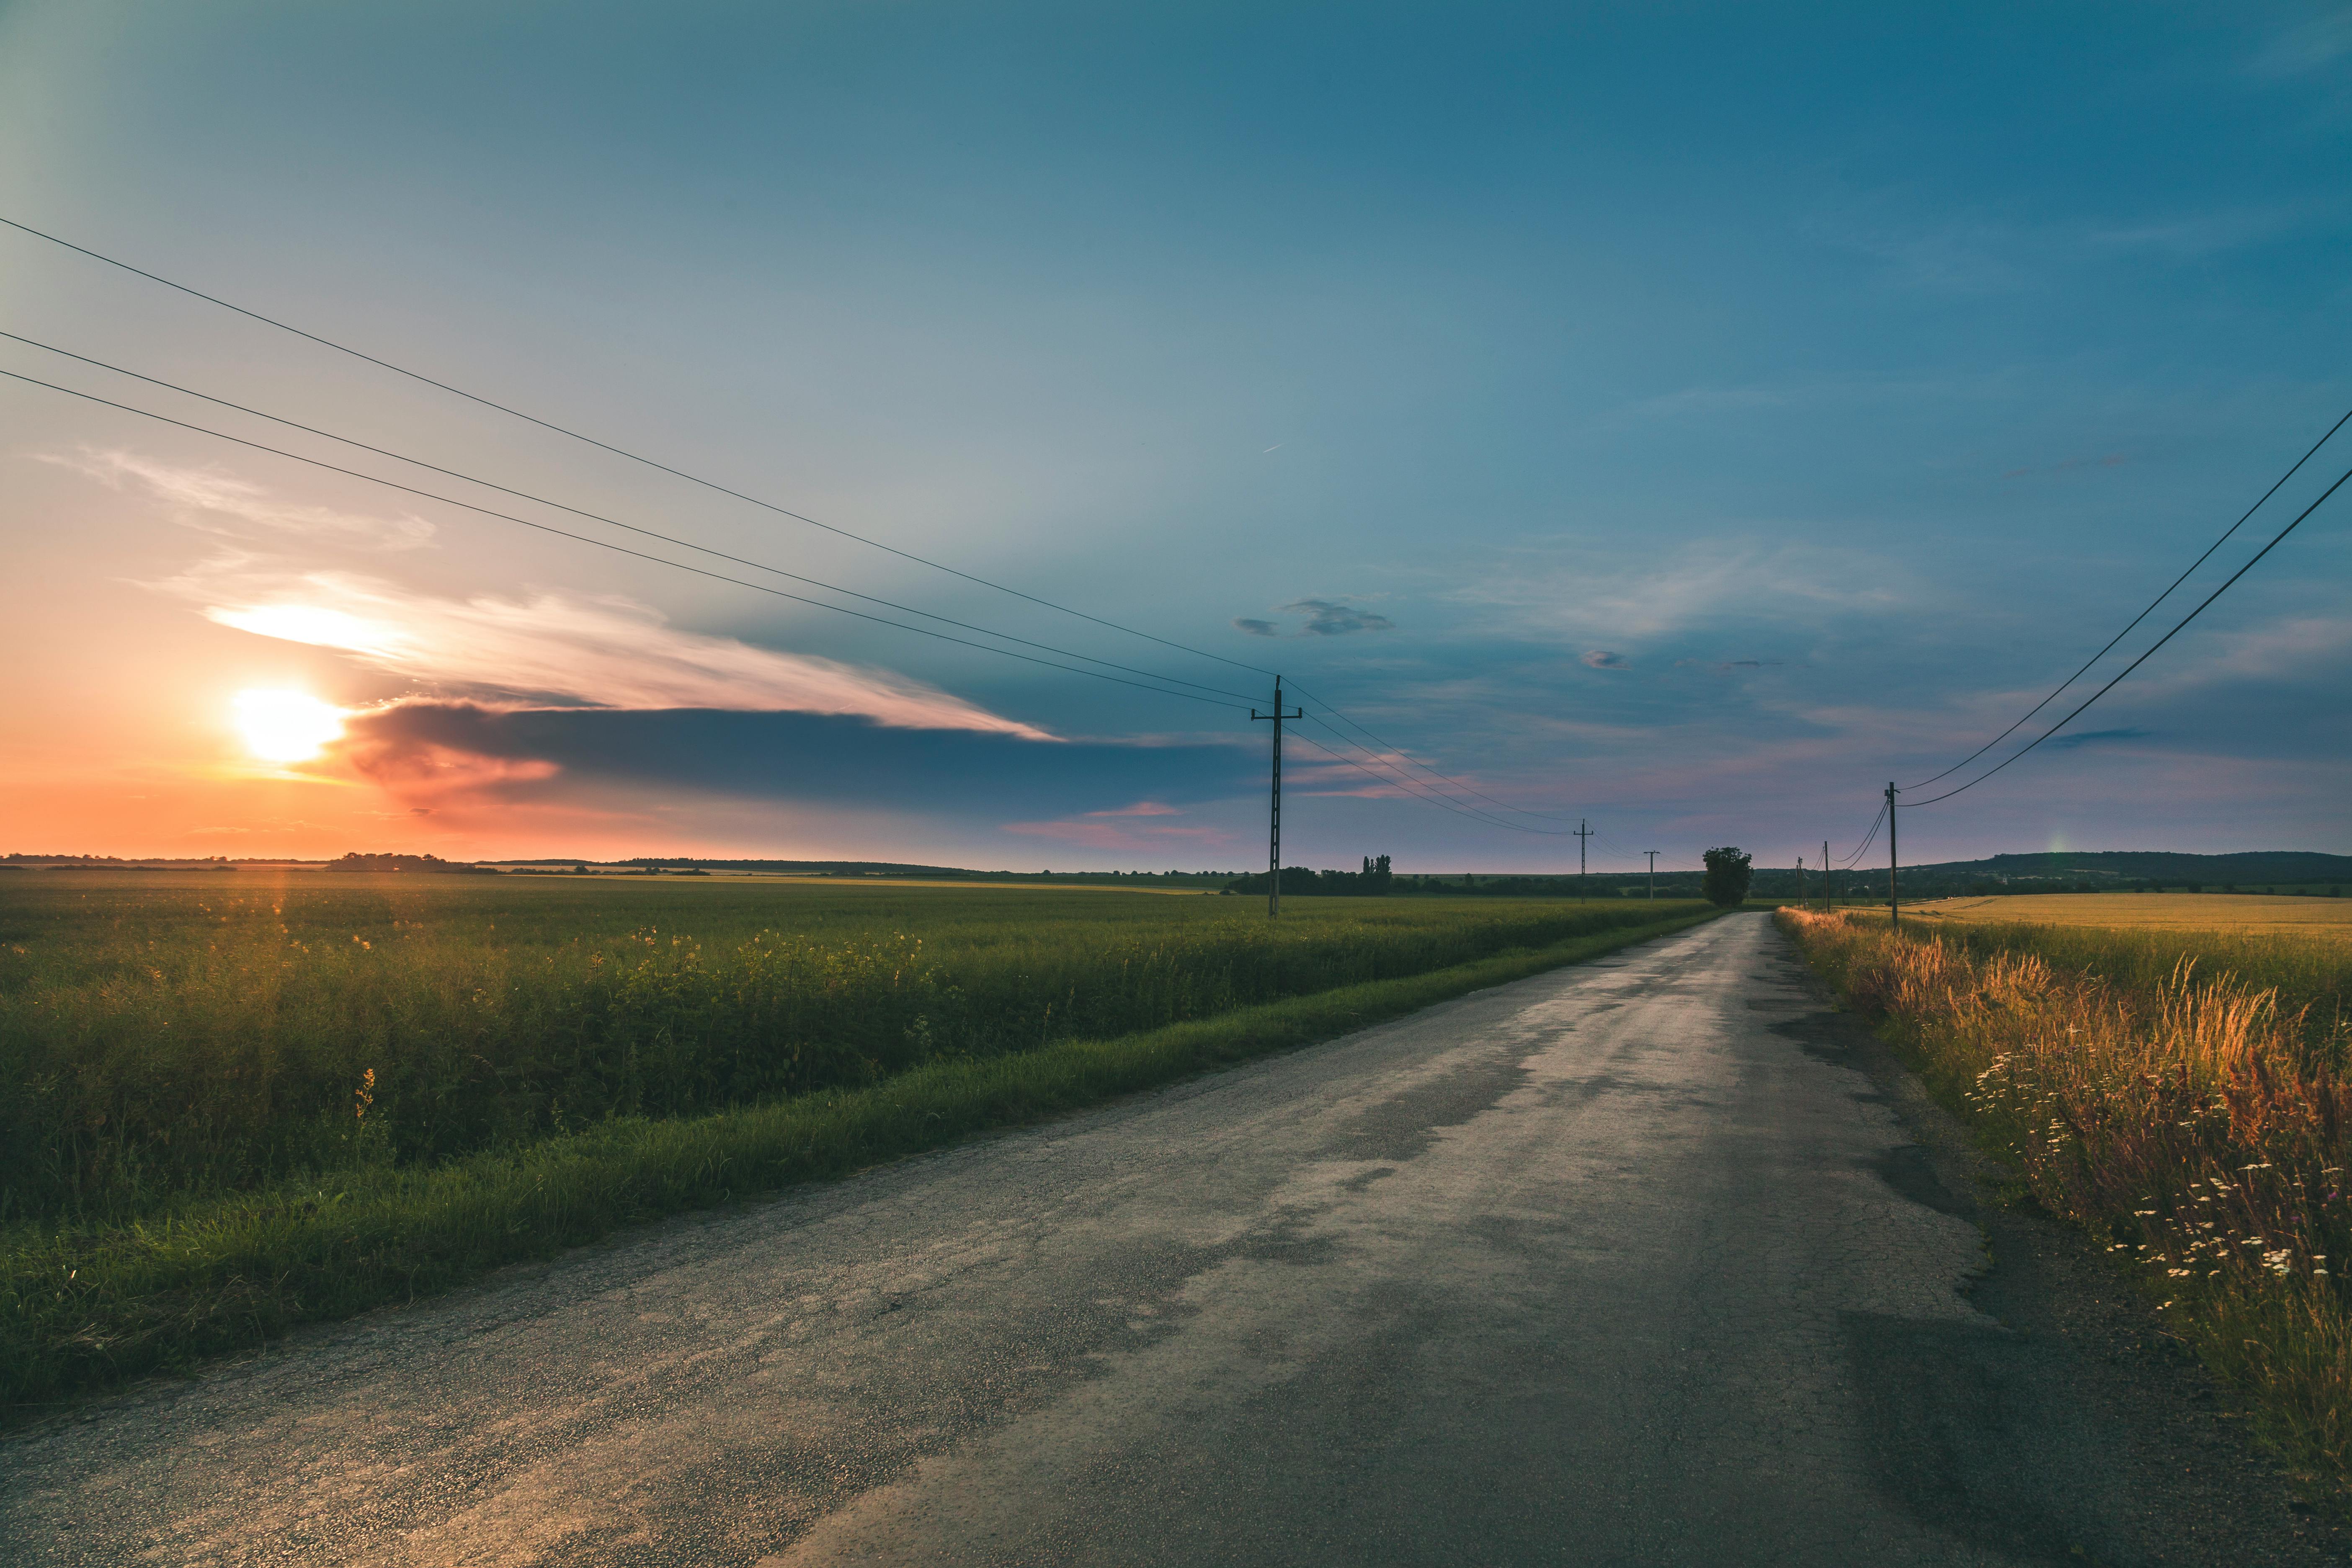 Country Road Pictures  Download Free Images on Unsplash